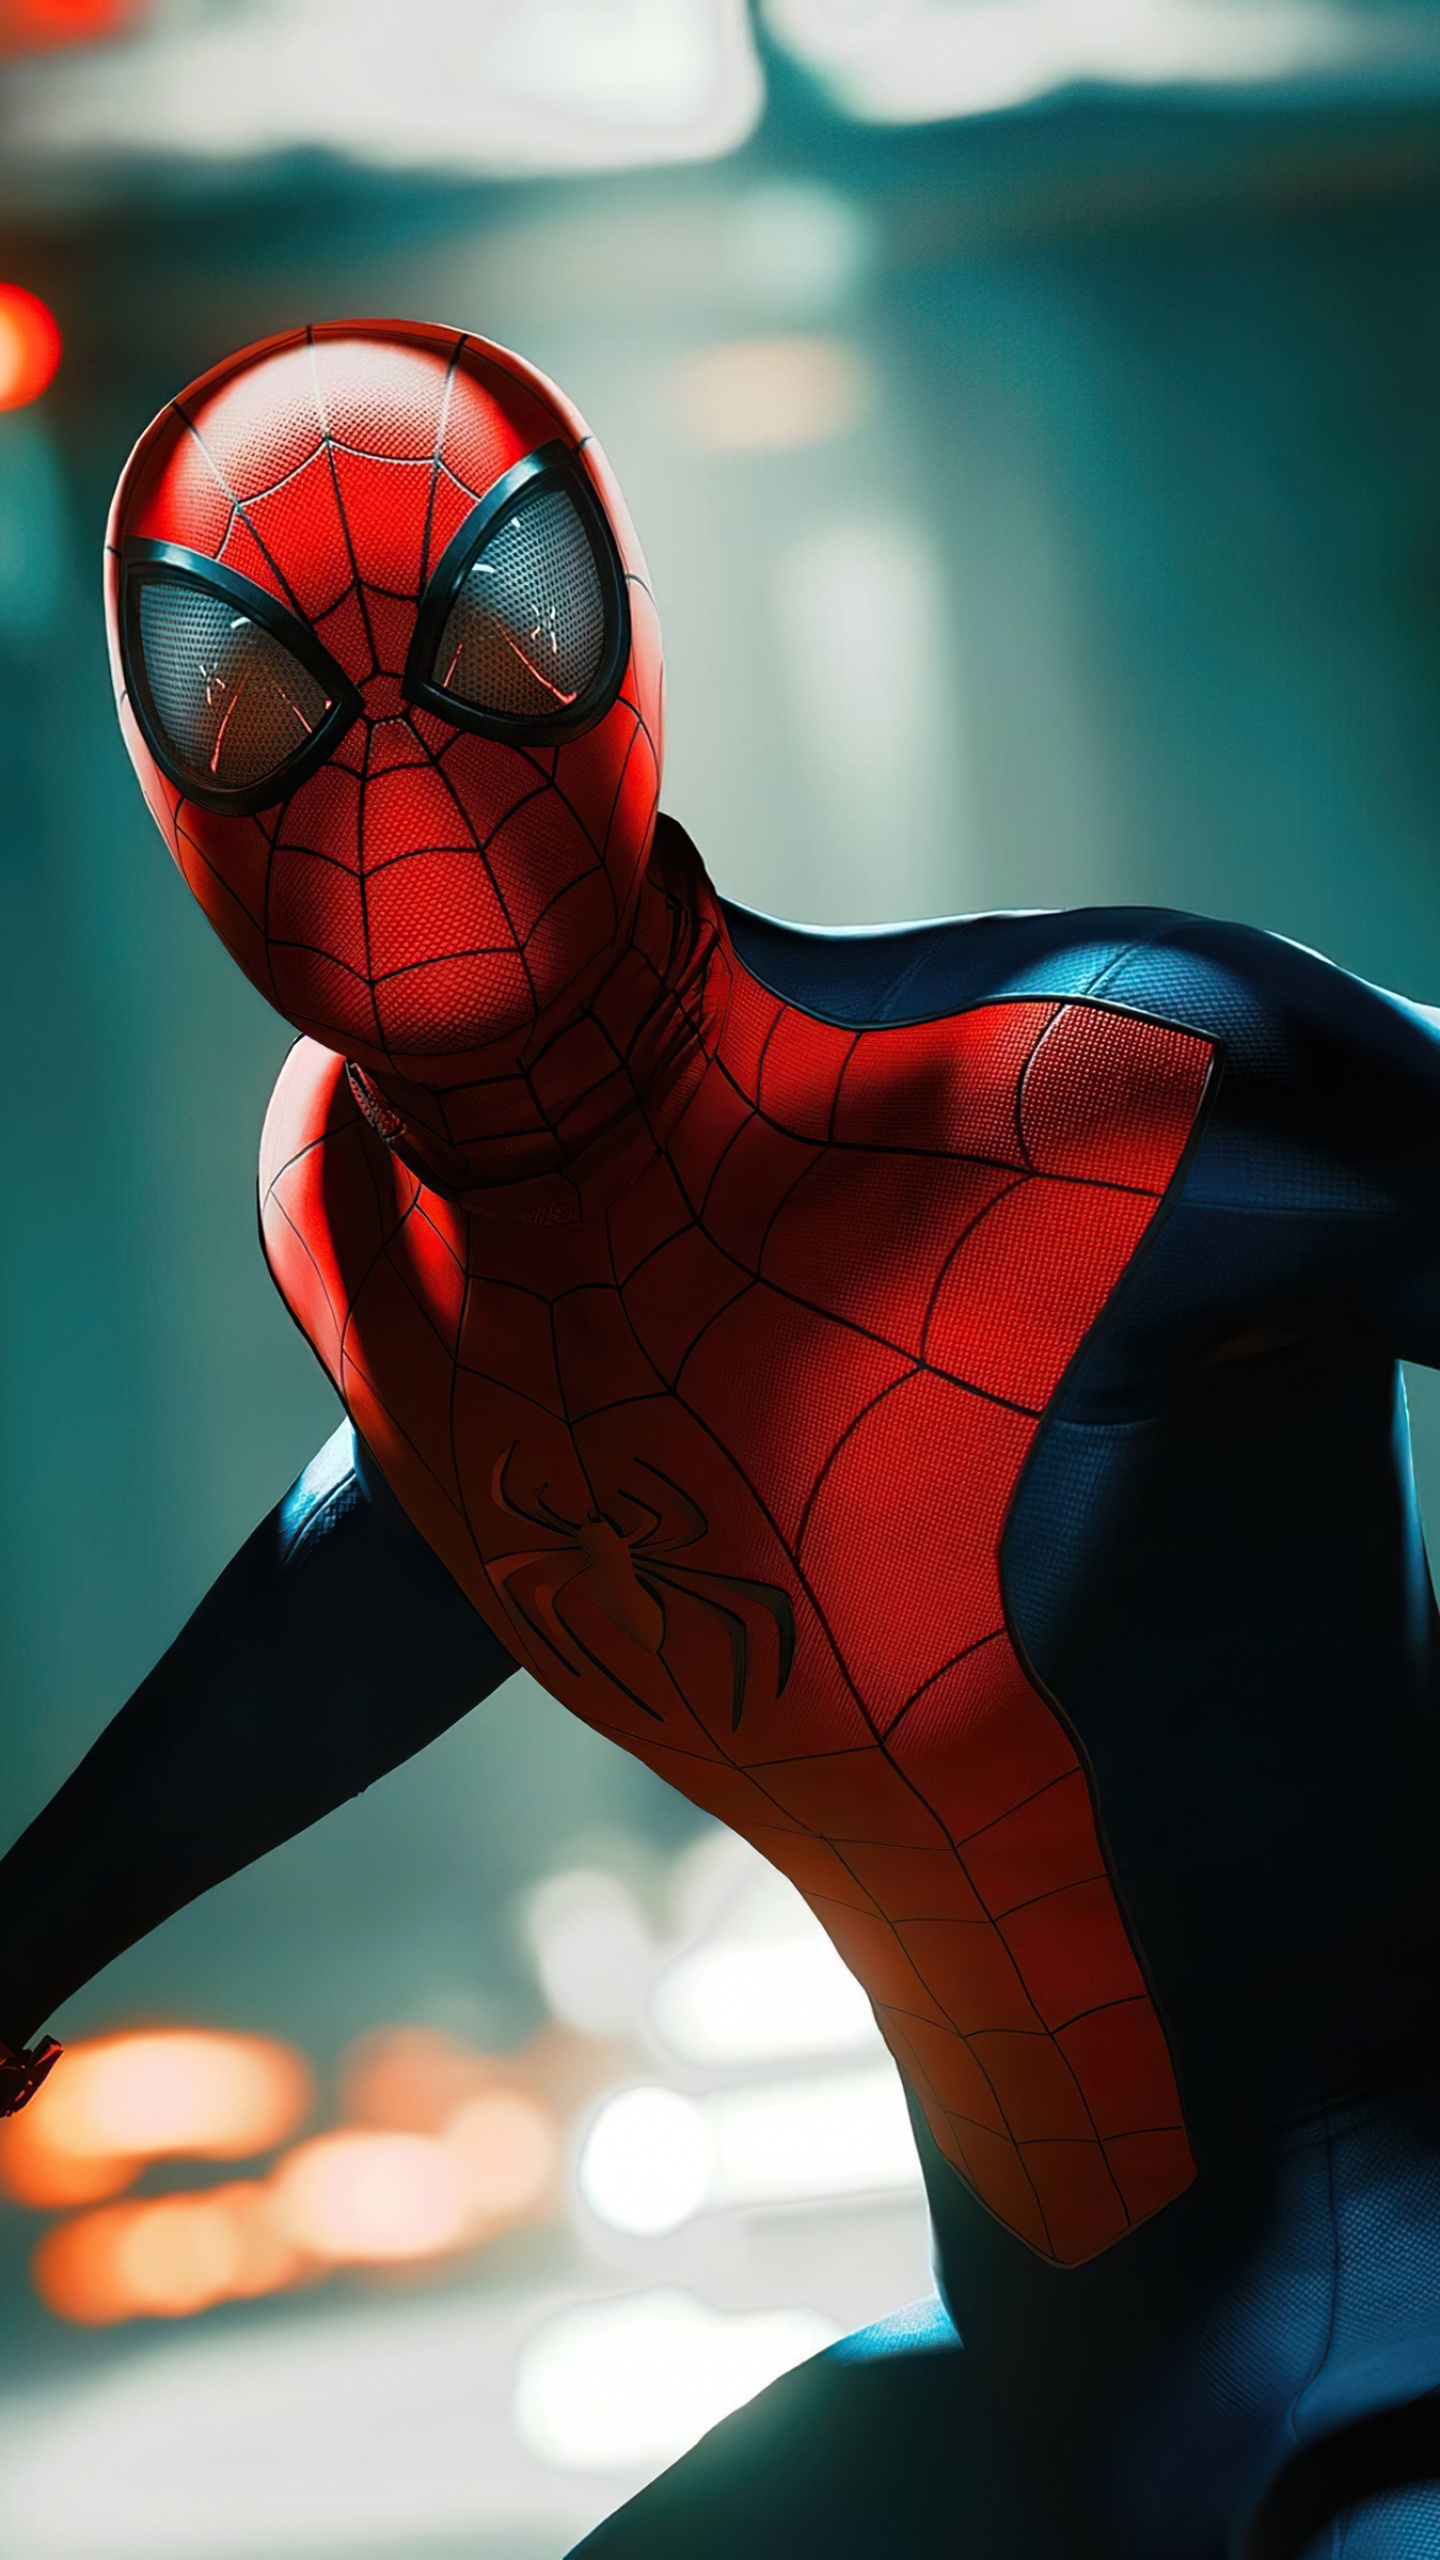 X 上的WallSpiderSpiderMan Advanced suit Lock screen wallpapers Tap to  enlarge SpiderManPS4 PS4share PSBlog httpstcoNG3Kbfql0C  X